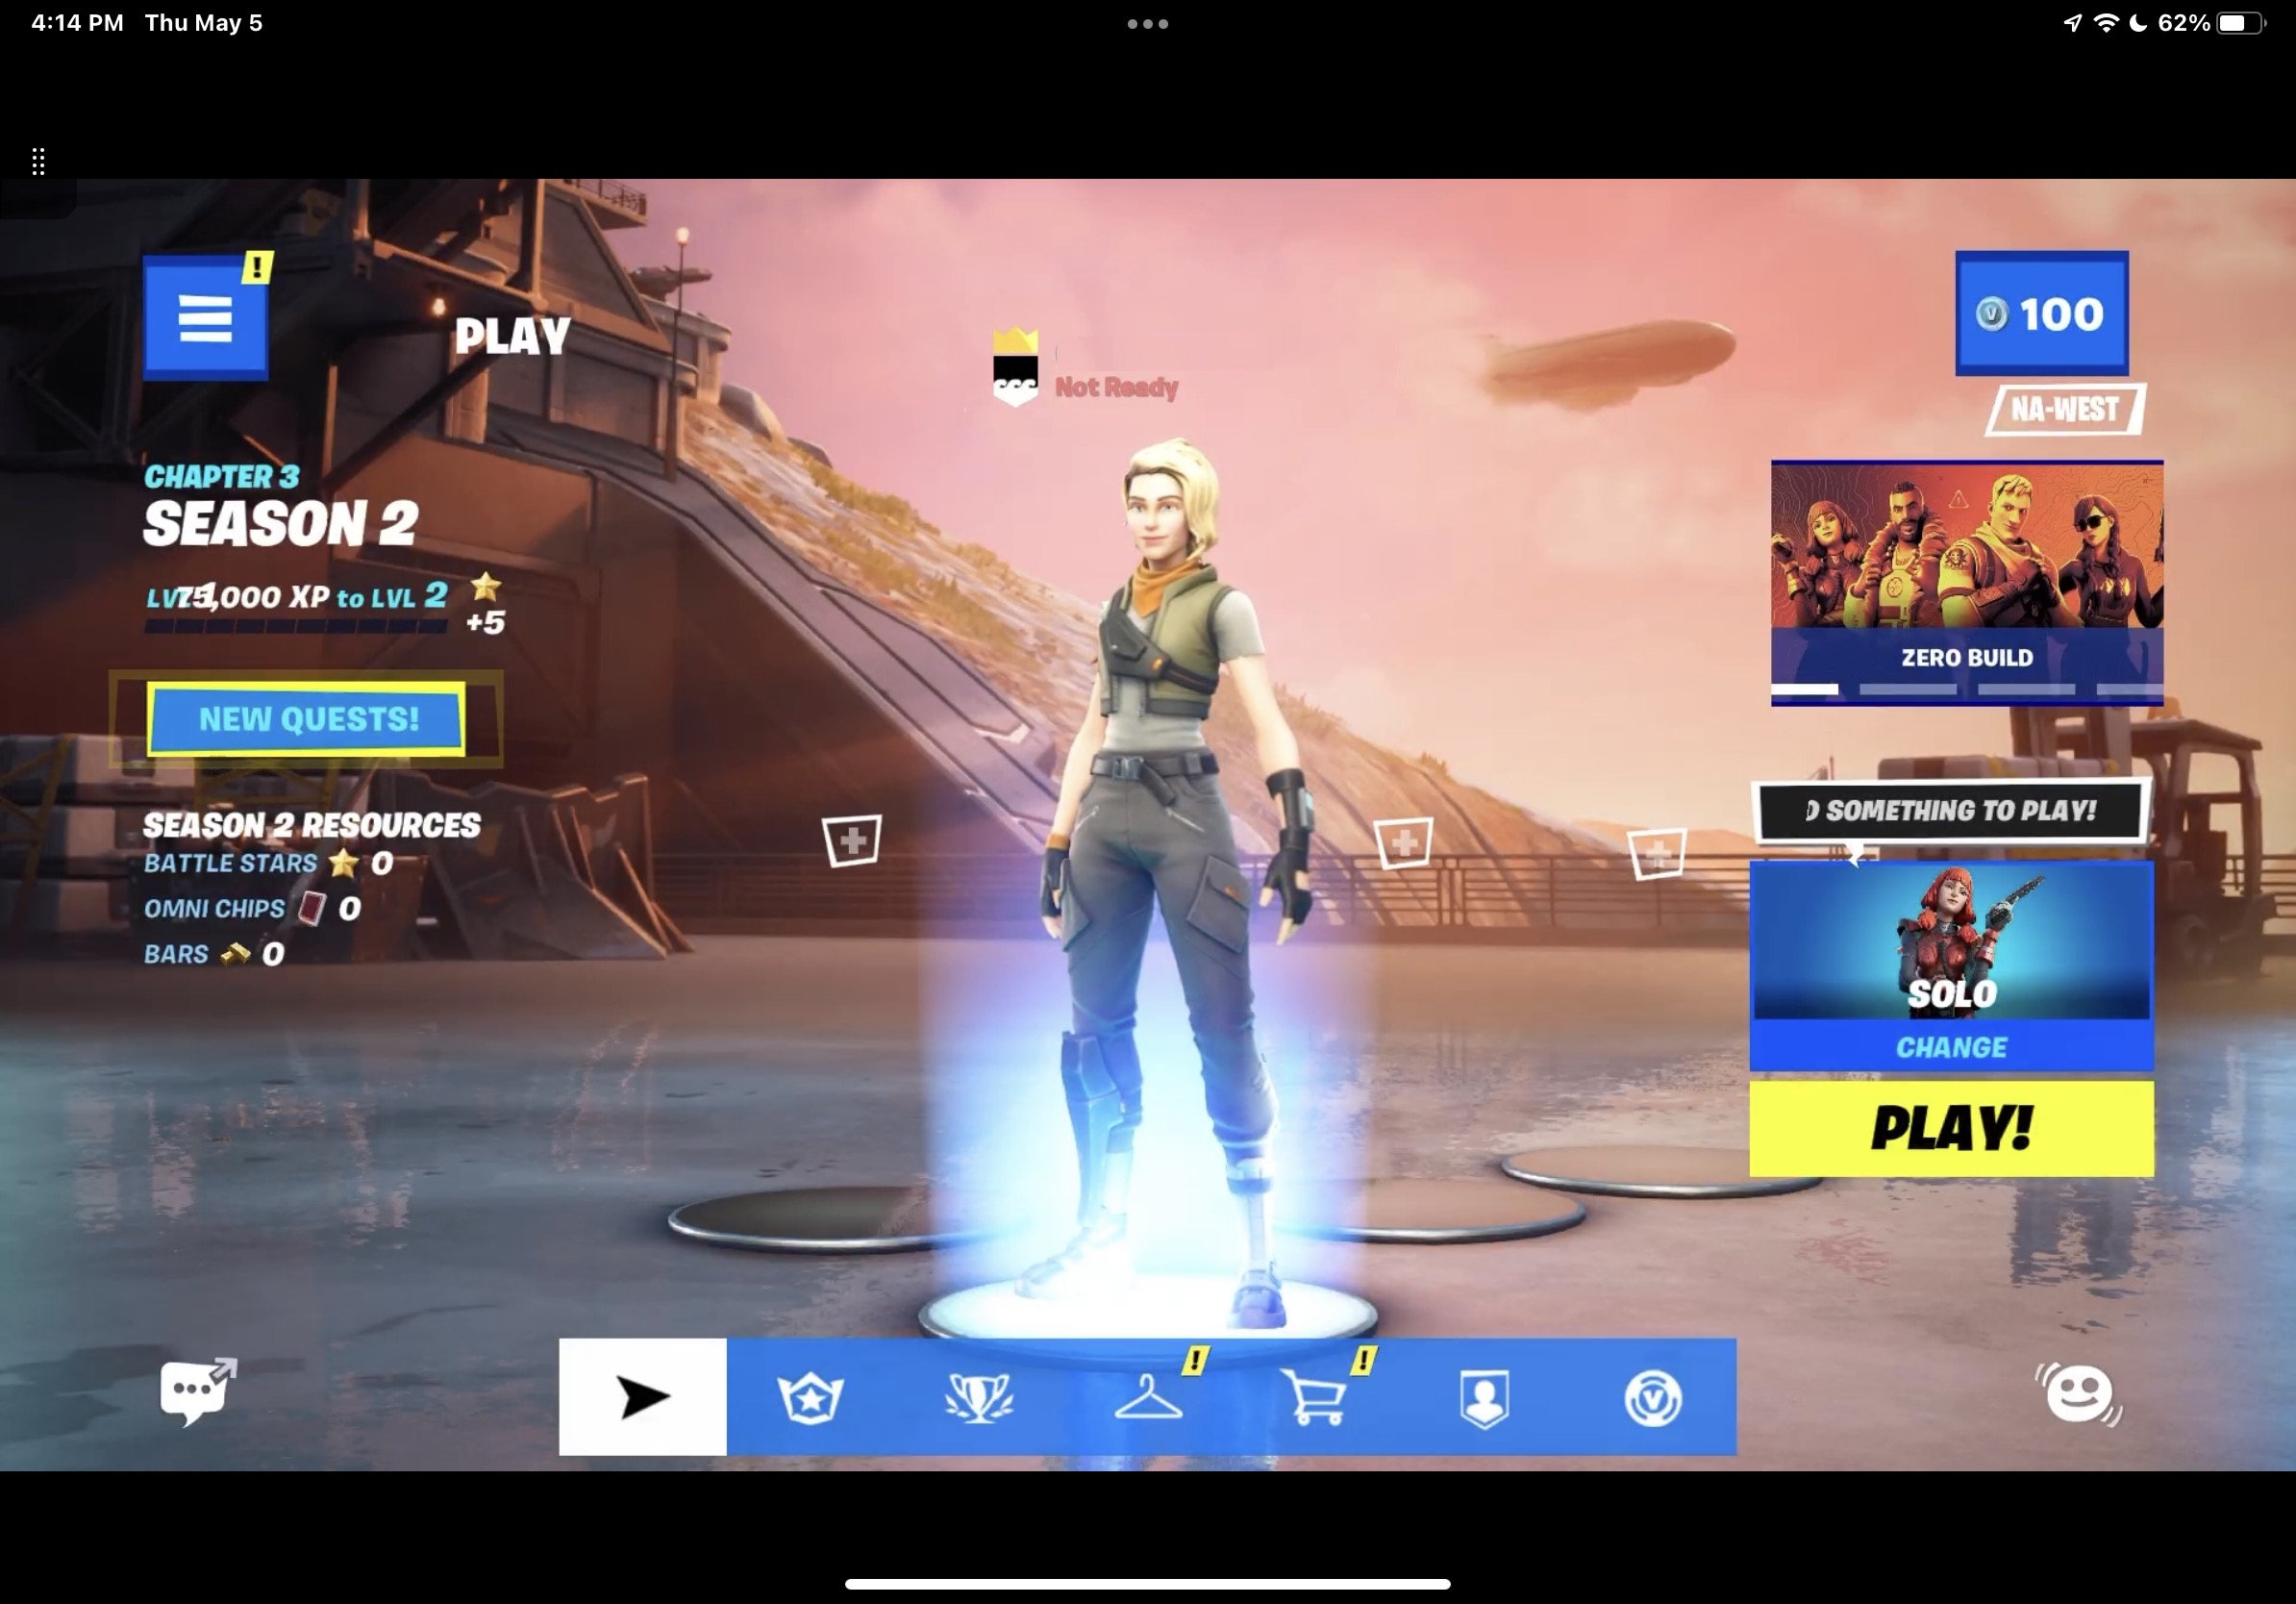 Now you can play Fortnite on iPhone or Android for free with Xbox